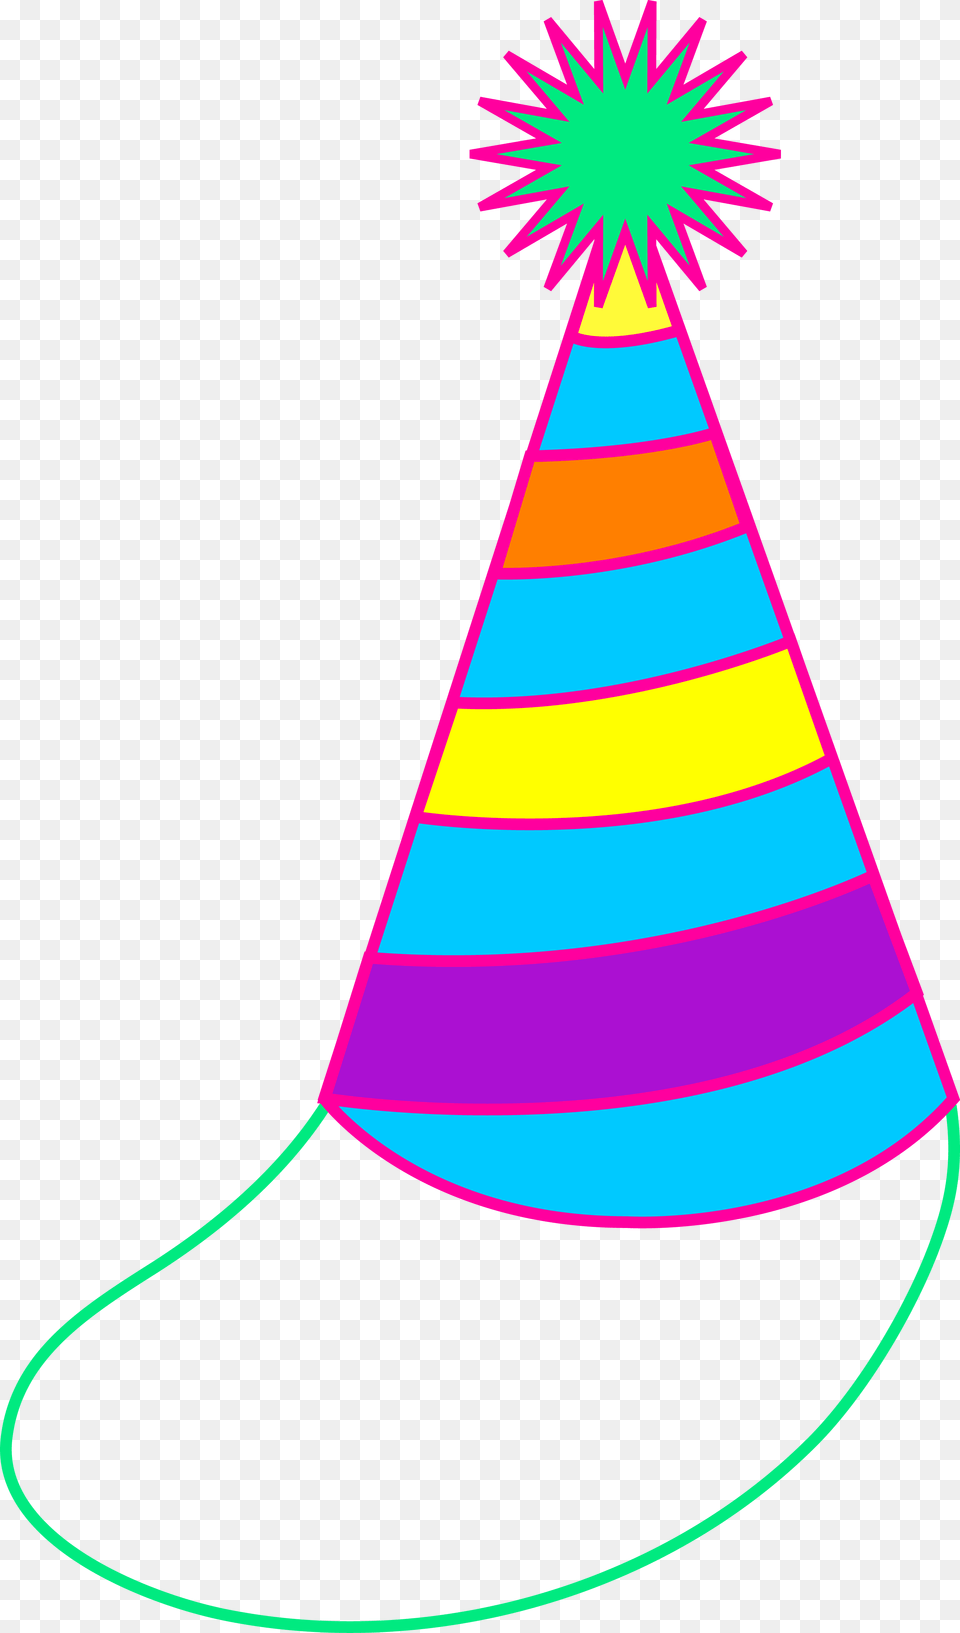 Party Hat Download Birthday Free Party Hat Clip Art, Clothing, Party Hat Png Image